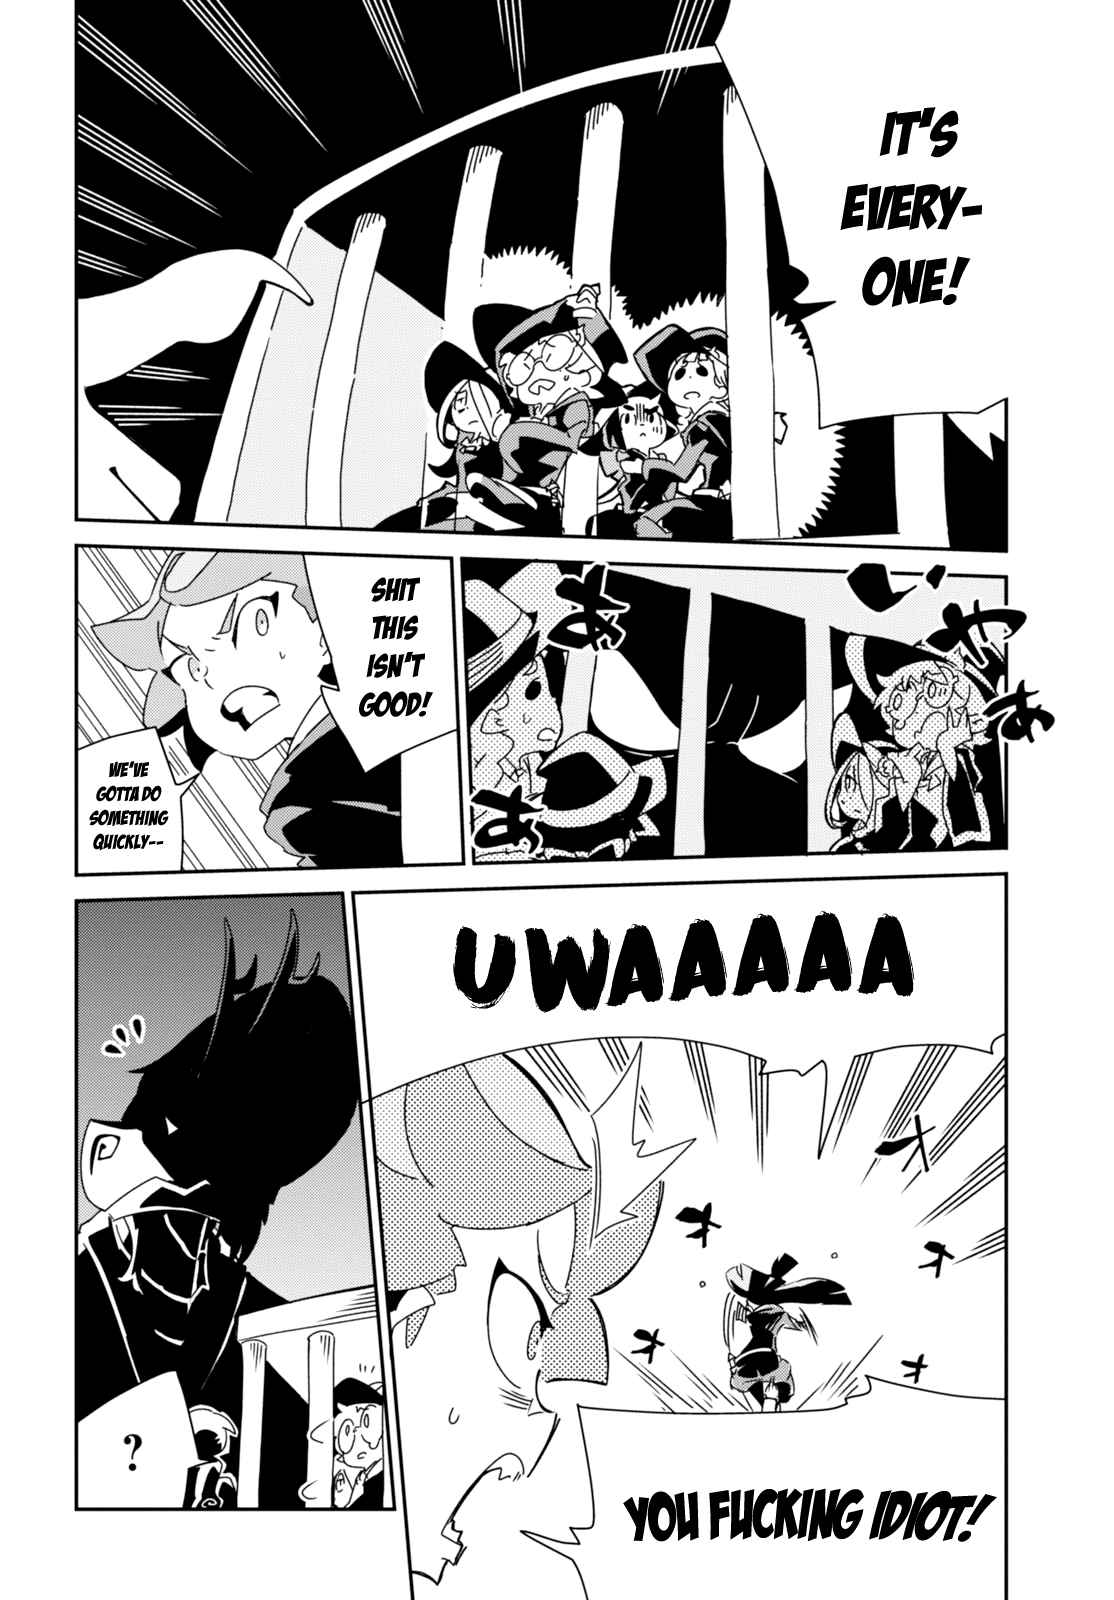 Little Witch Academia Vol. 1 Ch. 6